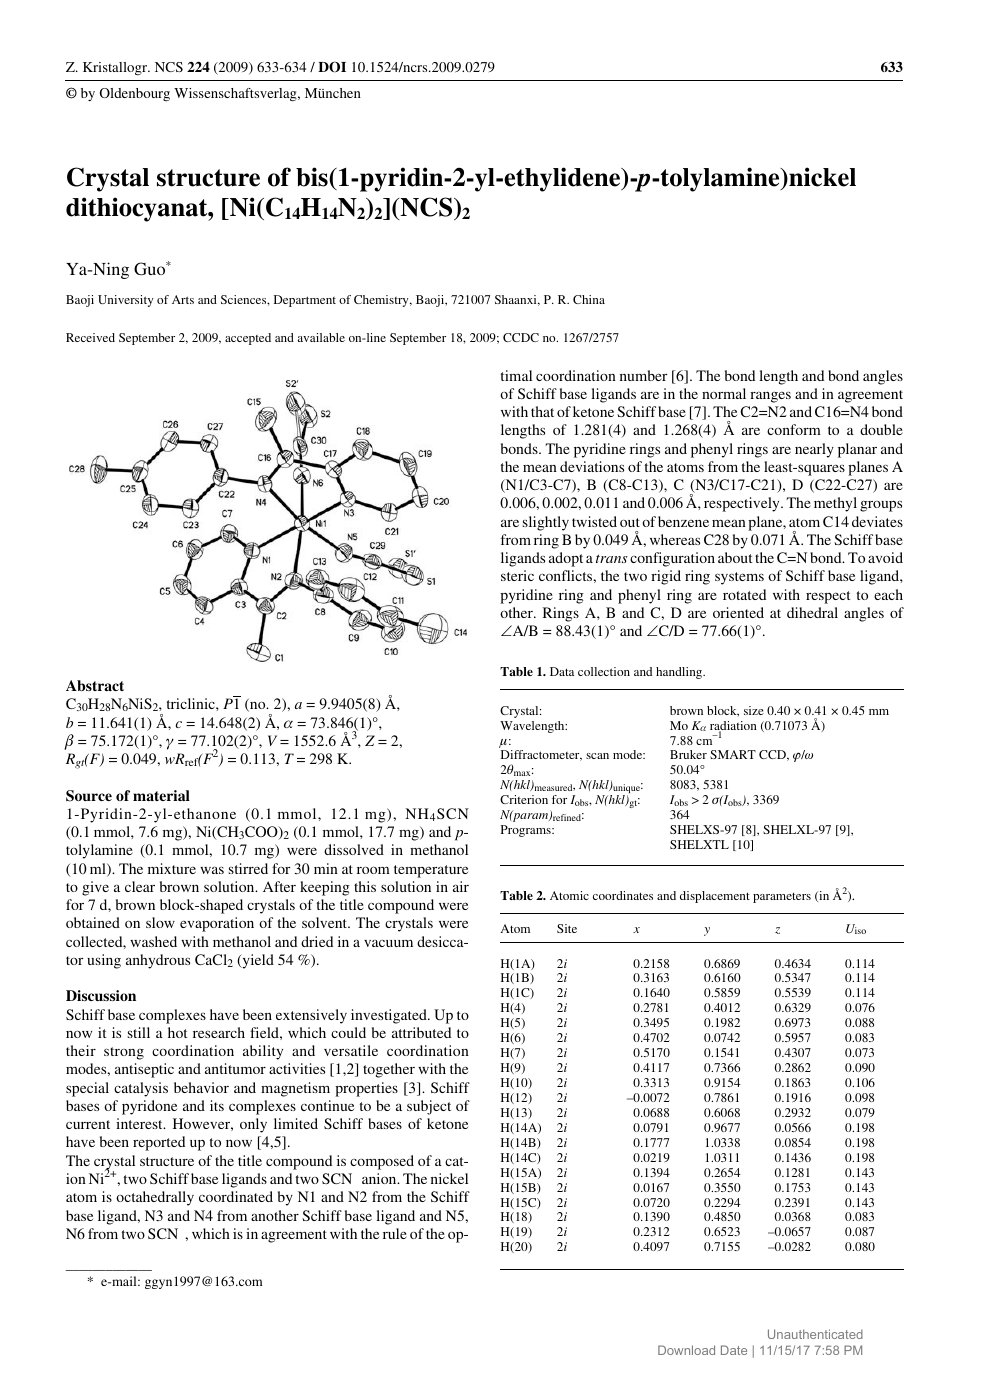 Crystal Structure Of Bis 1 Pyridin 2 Yl Ethylidene P Tolylamine Nickel Dithiocyanat Ni C14h14n2 2 Ncs 2 Topic Of Research Paper In Chemical Sciences Download Scholarly Article Pdf And Read For Free On Cyberleninka Open Science Hub